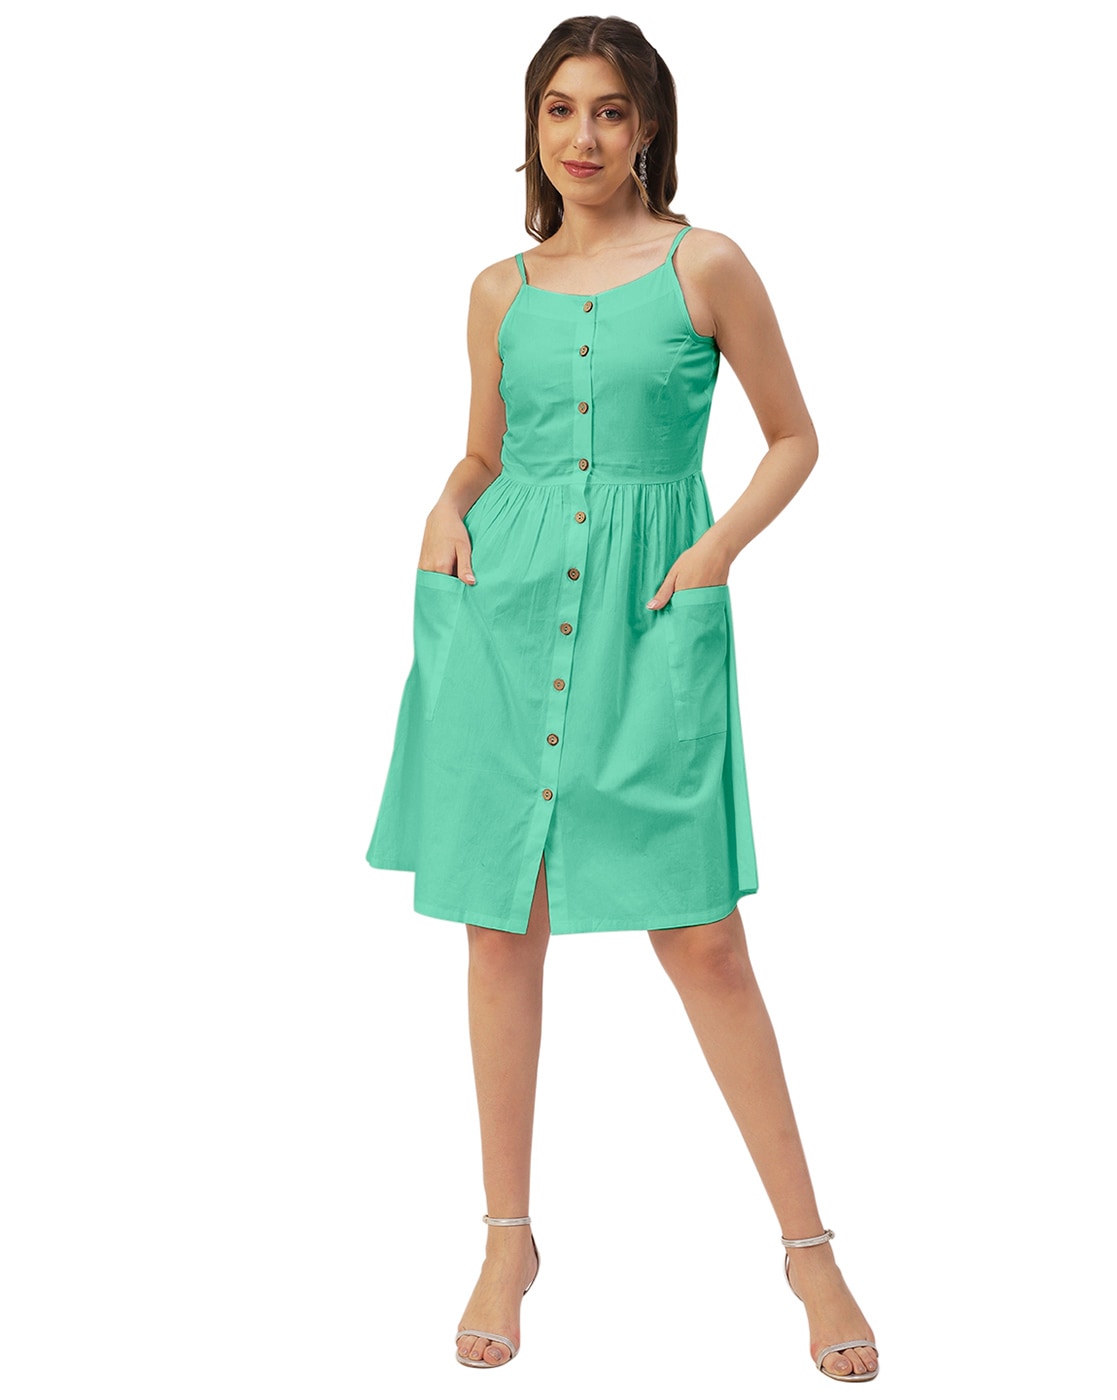 Women's Dresses Online: Low Price Offer on Dresses for Women - AJIO |  Women's knee length dresses, One piece dress design, Knee length dress